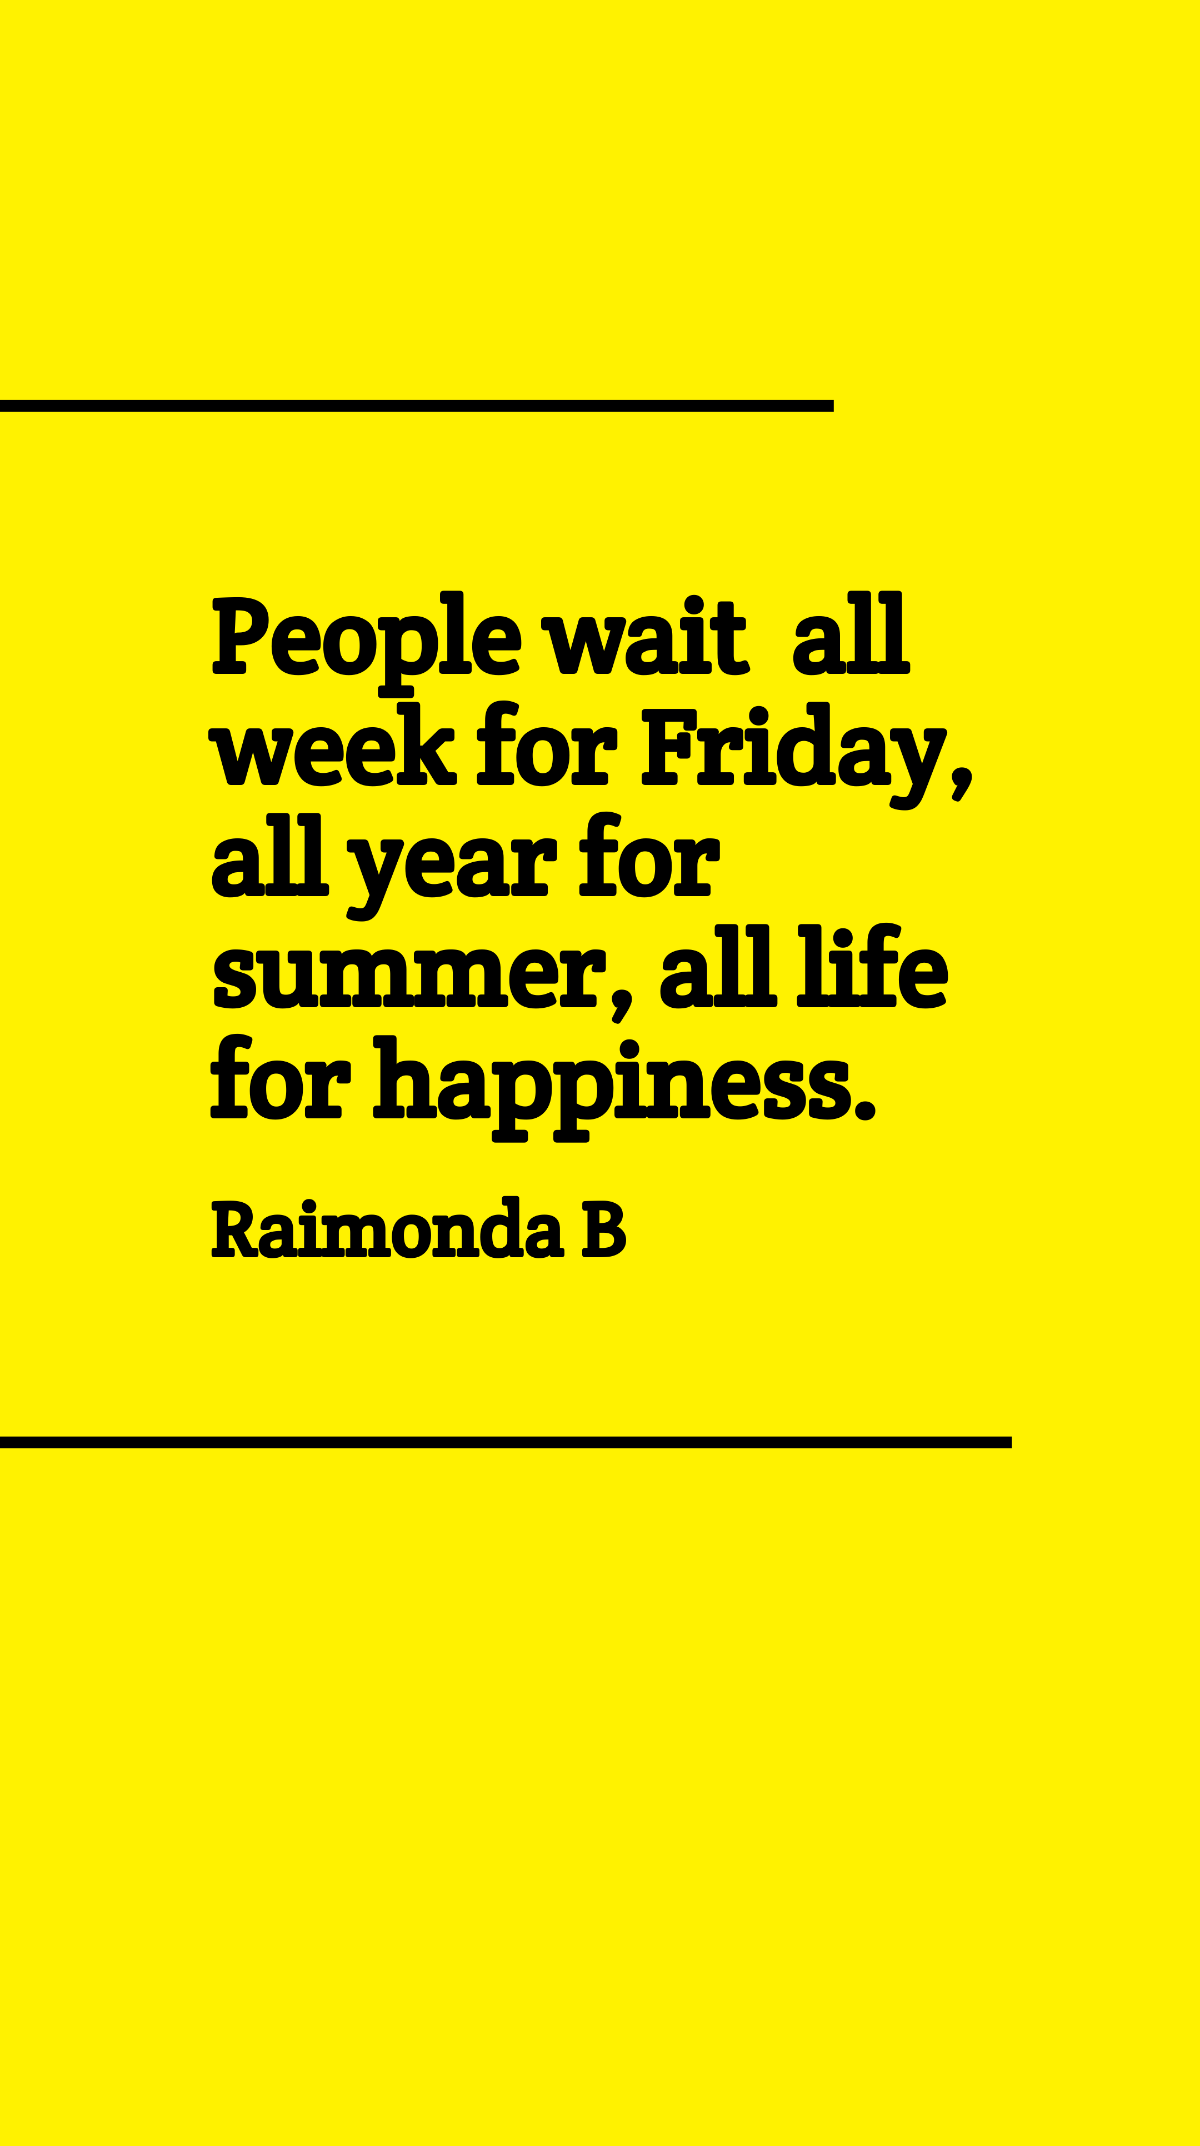 Free Raimonda B - People wait all week for Friday, all year for summer, all life for happiness. Template